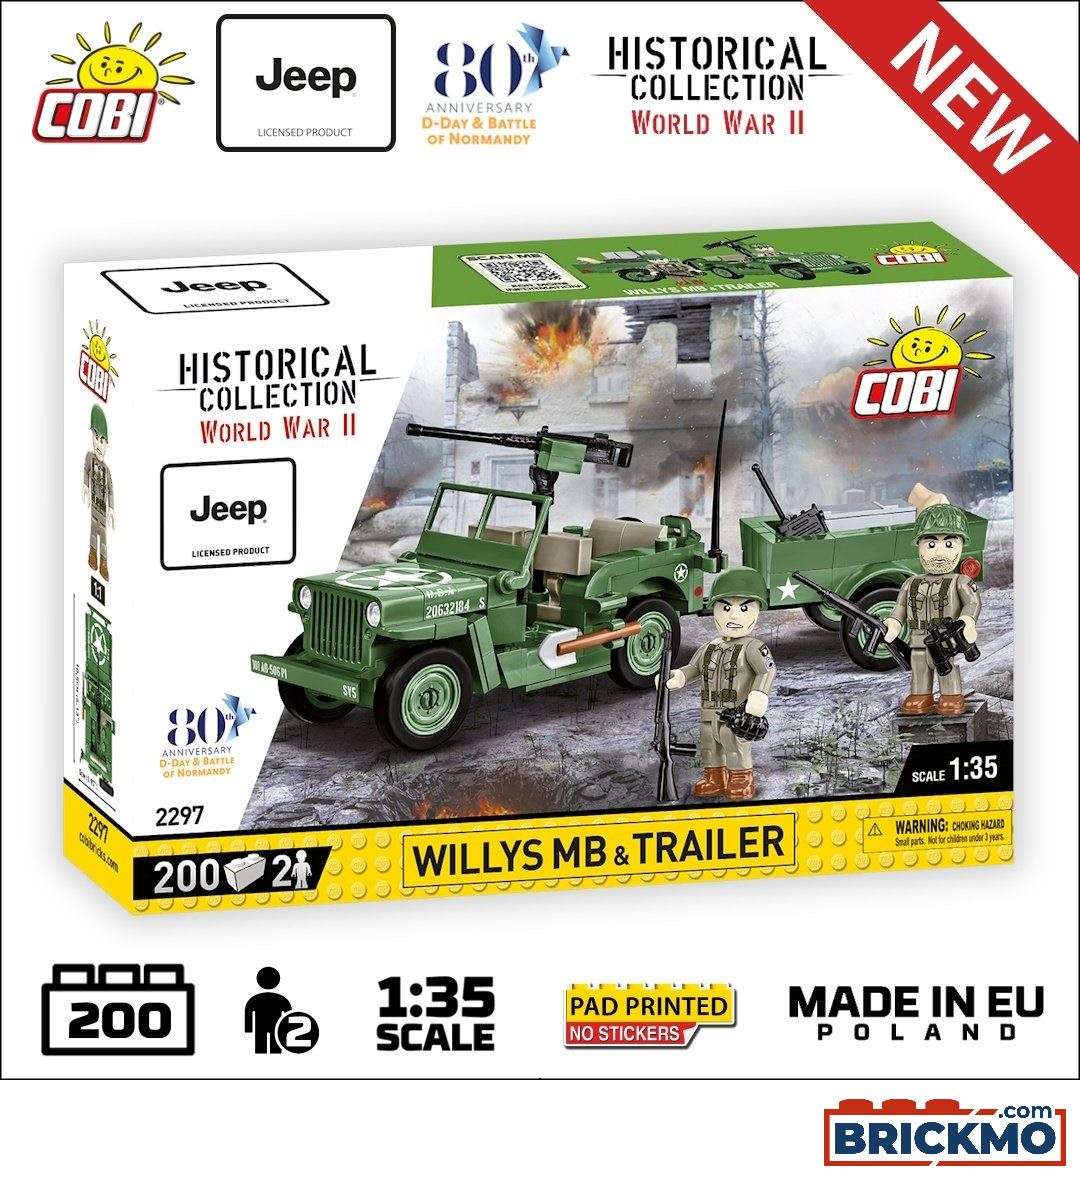 Cobi Historical Collection World War II 2297 Willys MB + Trailer 2297